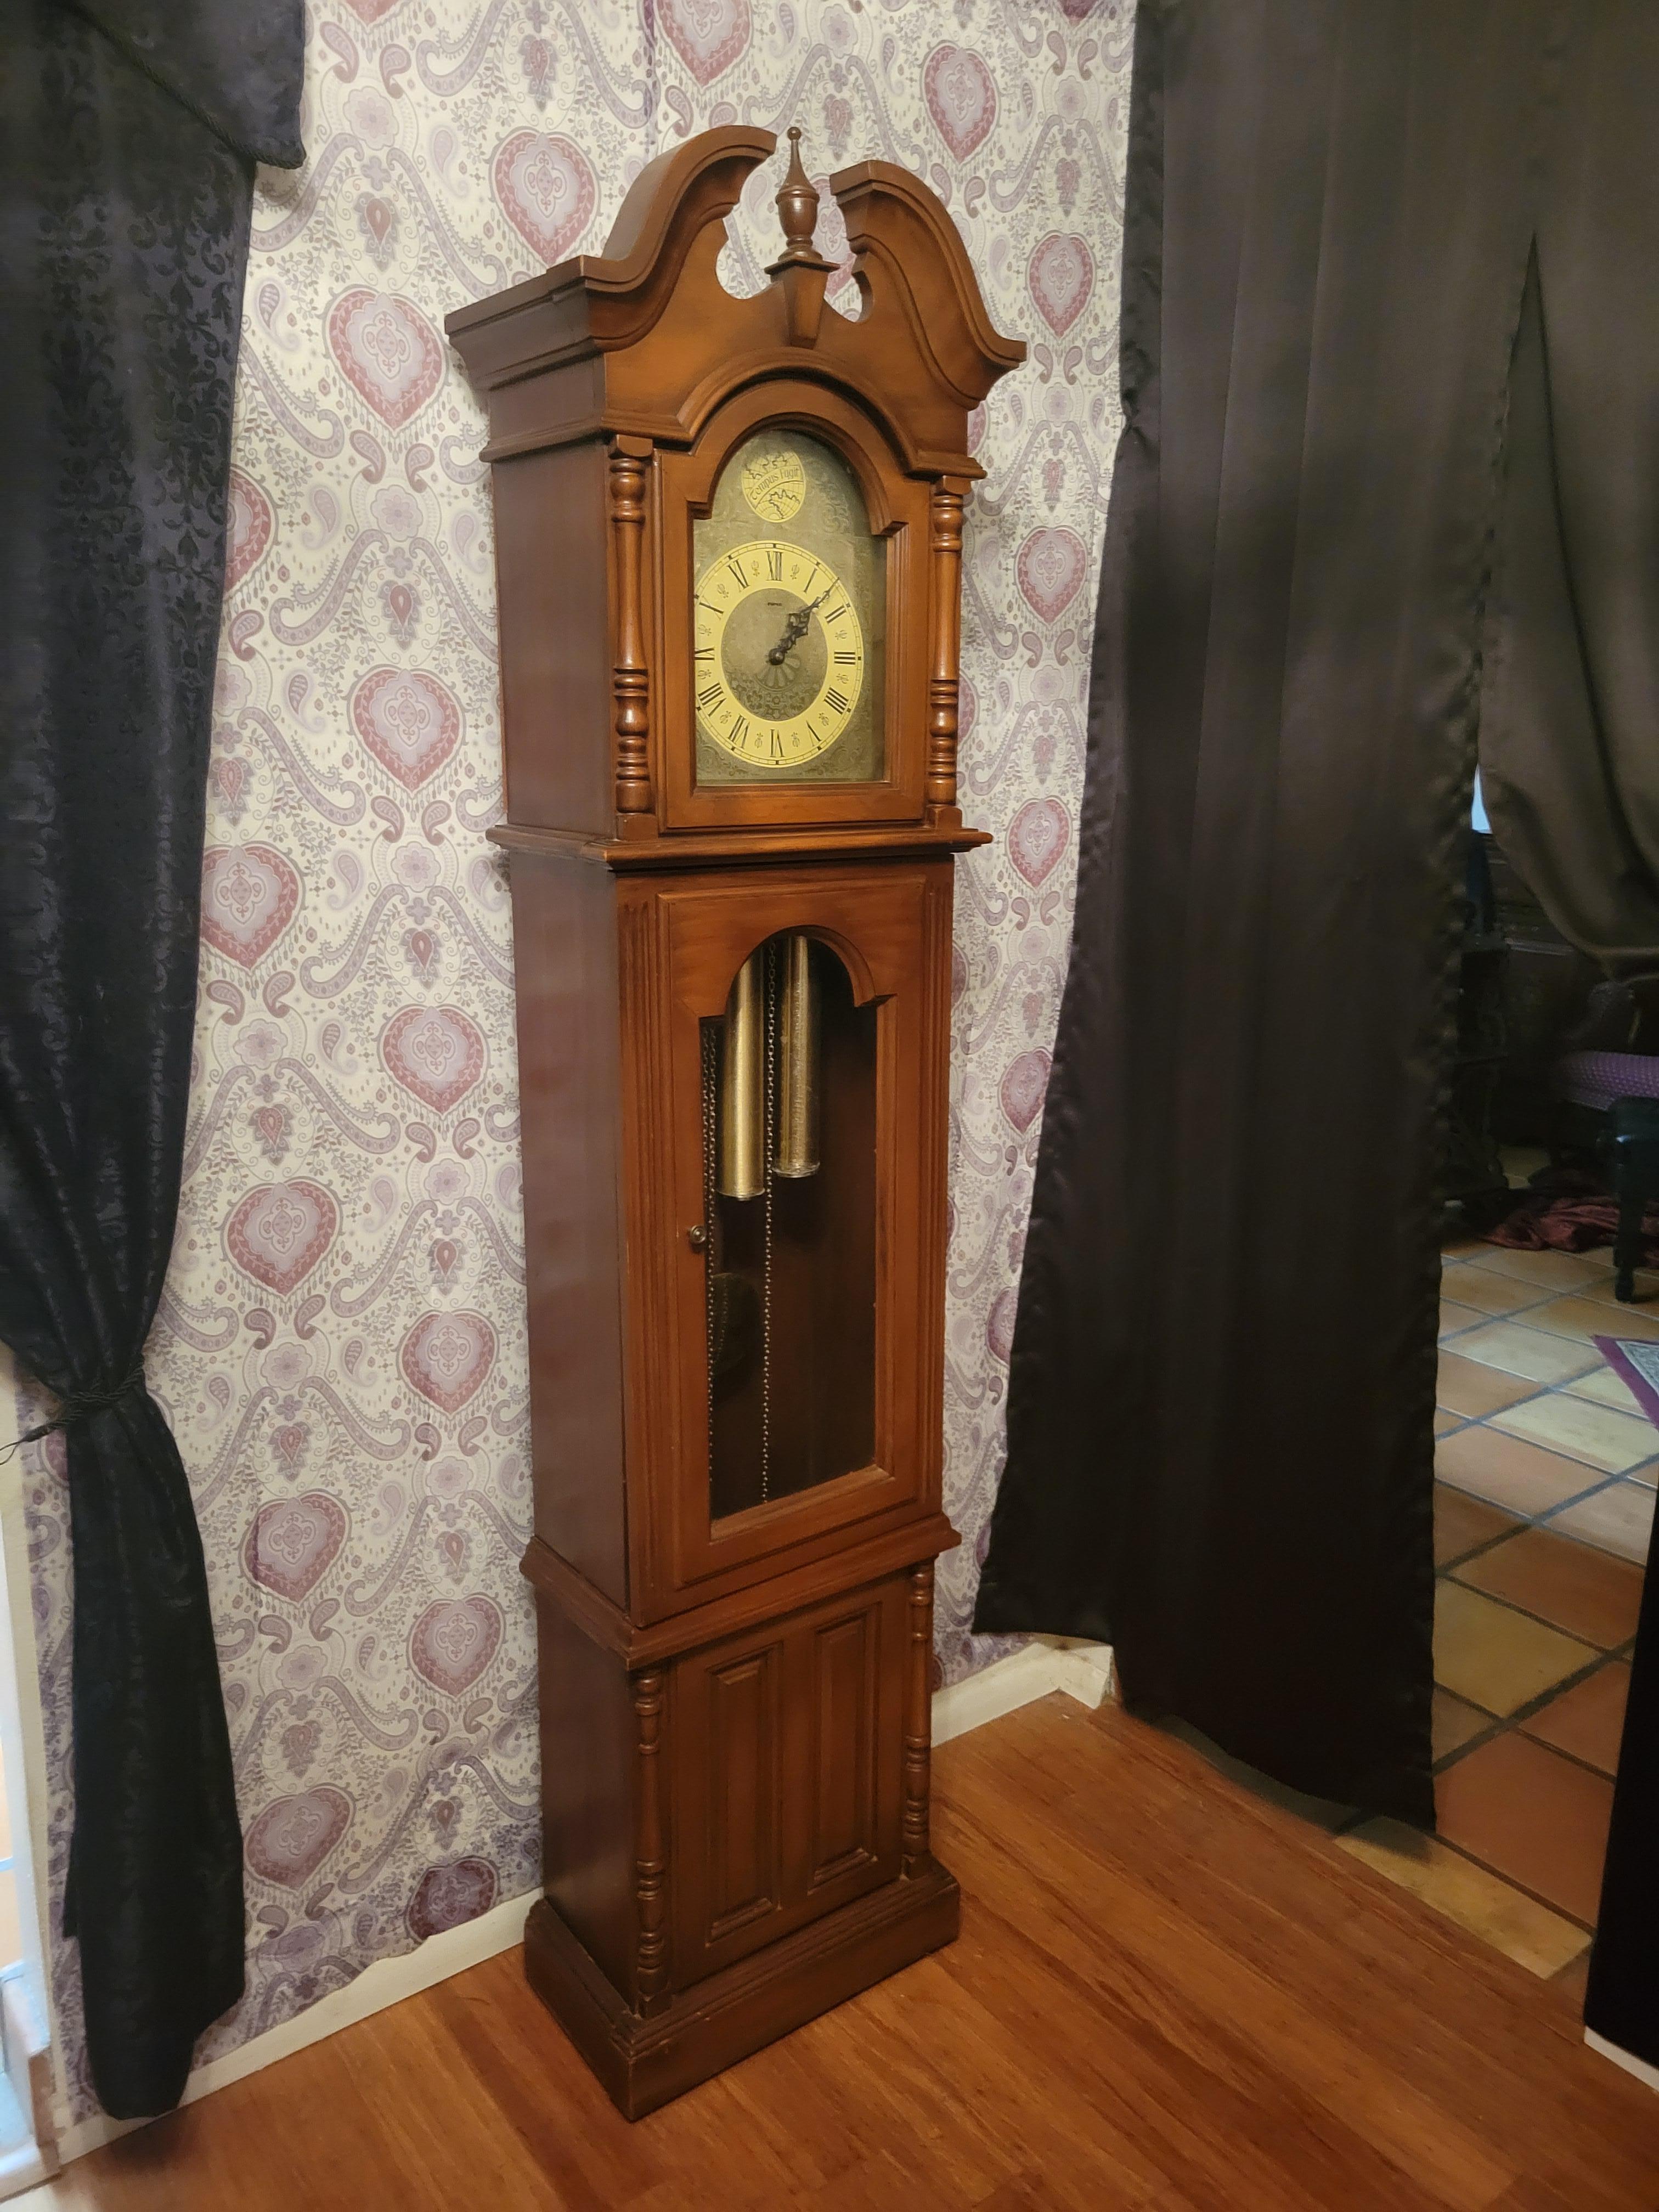 Vintage, 1976, weight-driven Piper grandfather clock. The clock has a West Germany Franz Hermle 451-053 85cm / 70.77 movement with a beautiful Westminster Chime. The chime goes on every 15 minutes and plays 4, 8 12, 16 notes respectively..
The case